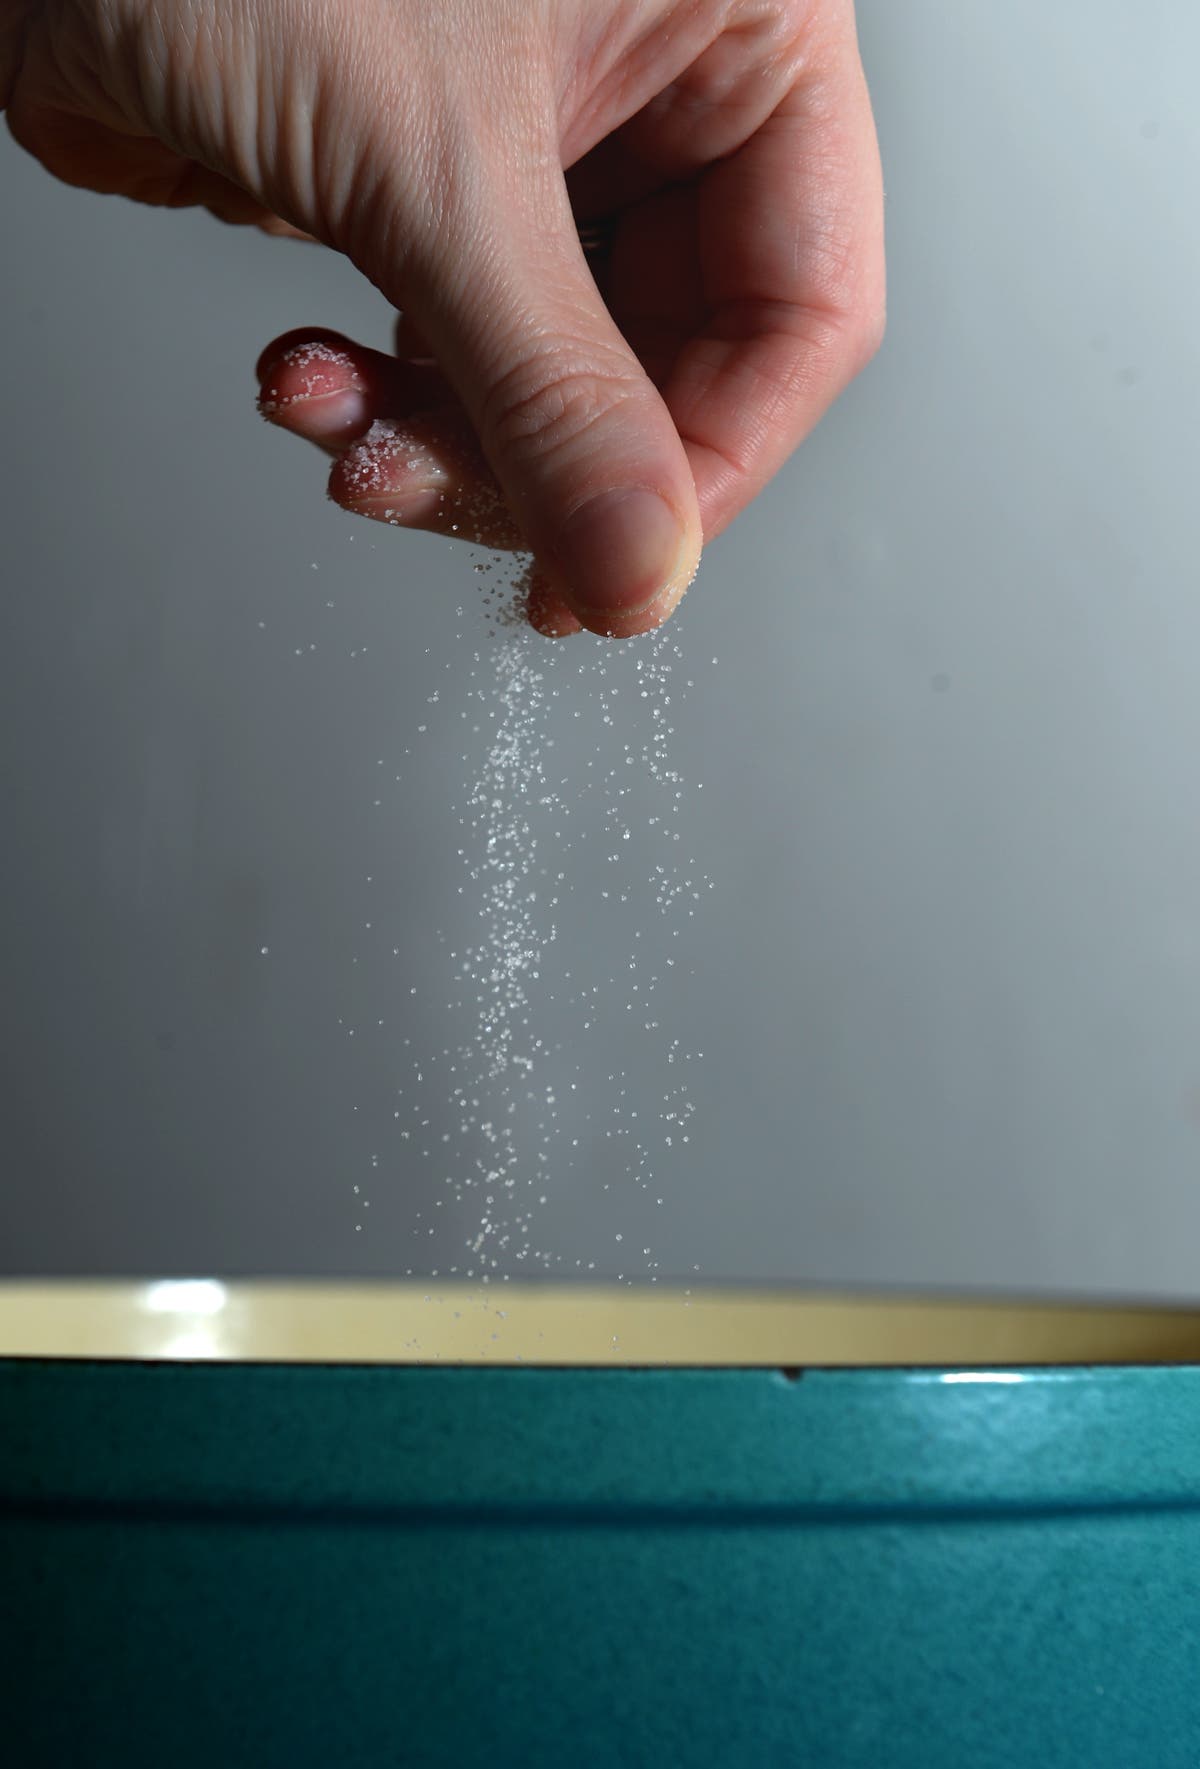 Leading heart charity calls for salt levy to save lives